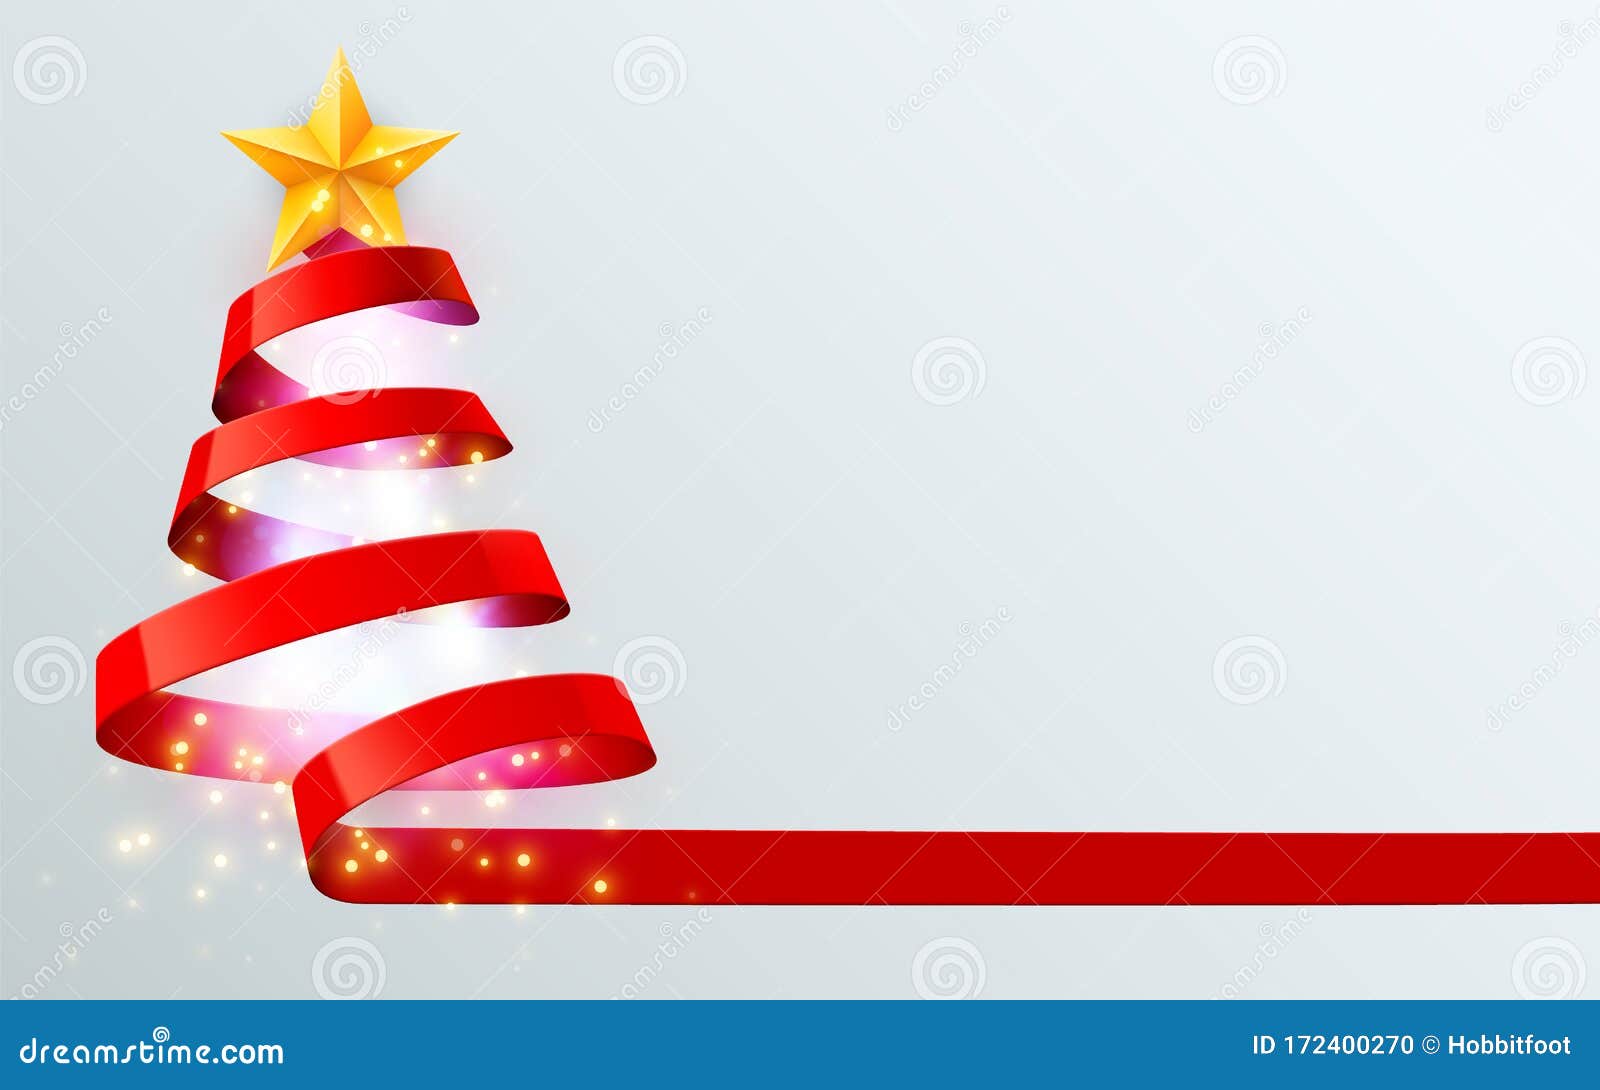 Christmas Tree Made of Red Ribbon on Bright Background. New Year and  Christmas Greeting Card or Party Invitation Stock Vector - Illustration of  design, blank: 172400270